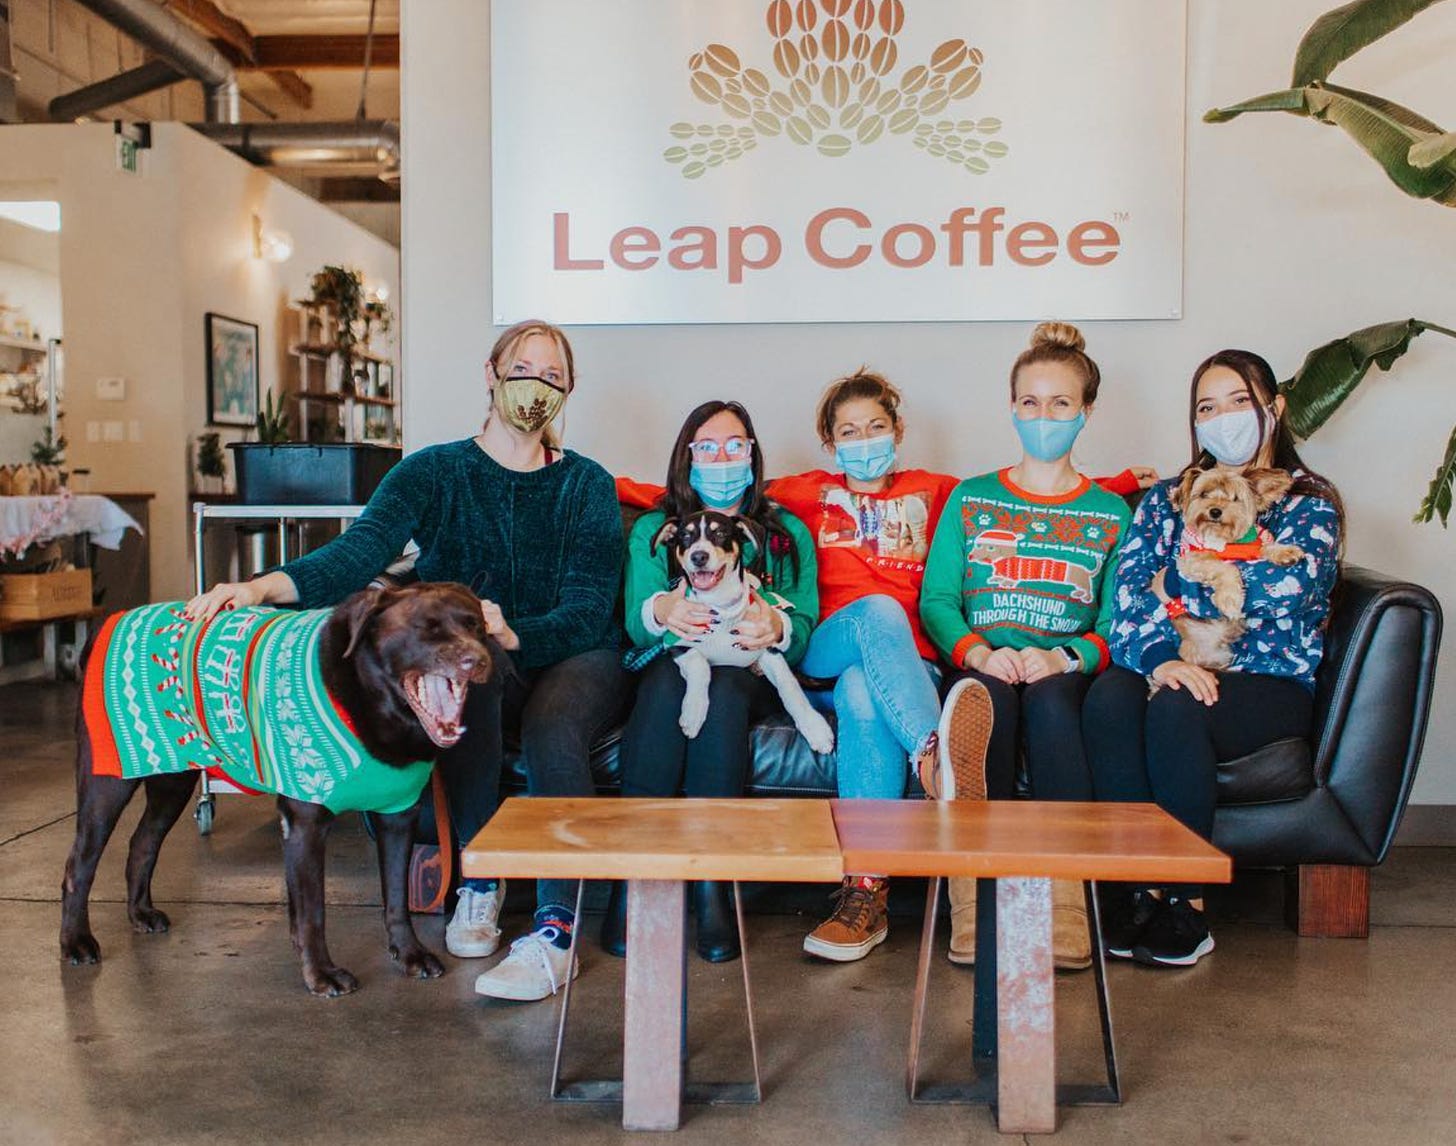 Five women sit on a black leather couch wearing protective facemasks, ugly sweaters and a Leap Coffee sign is above them on the wall. Three dogs are also in the picture. A big, yawning brown lab to the left and two small lap dogs on the couch. The dogs also have ugly sweaters on!